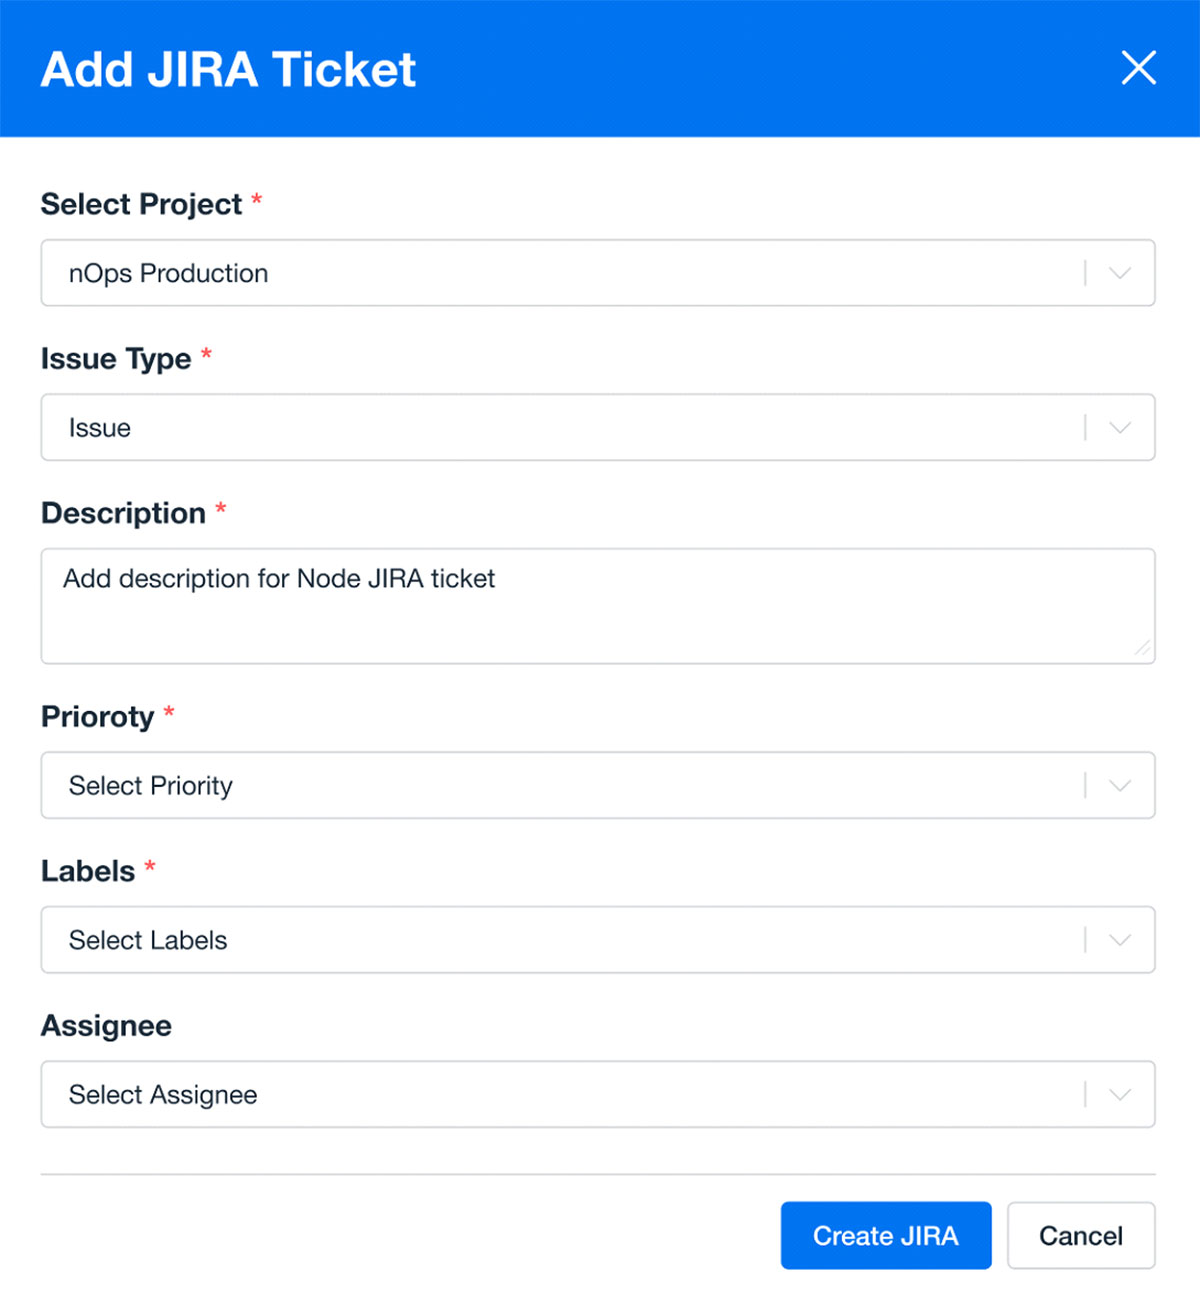 JIRA ticket for recommendation